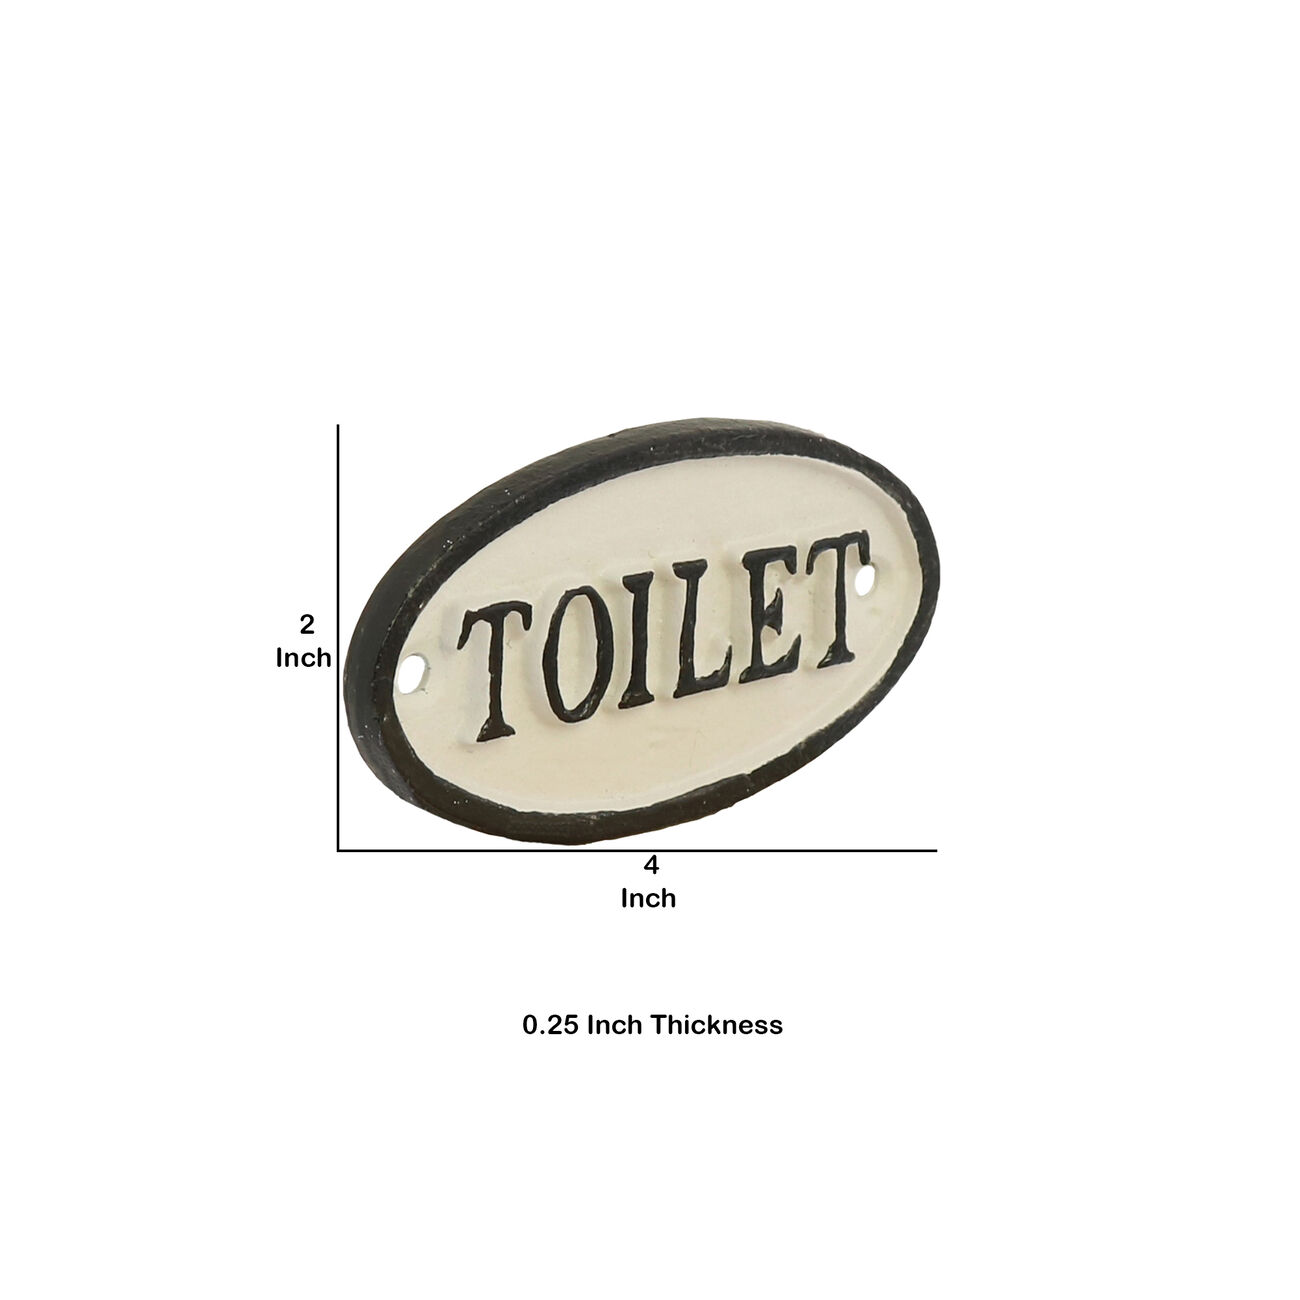 Traditional Metal Toilet Sign with Hand Painted Design, Black and White